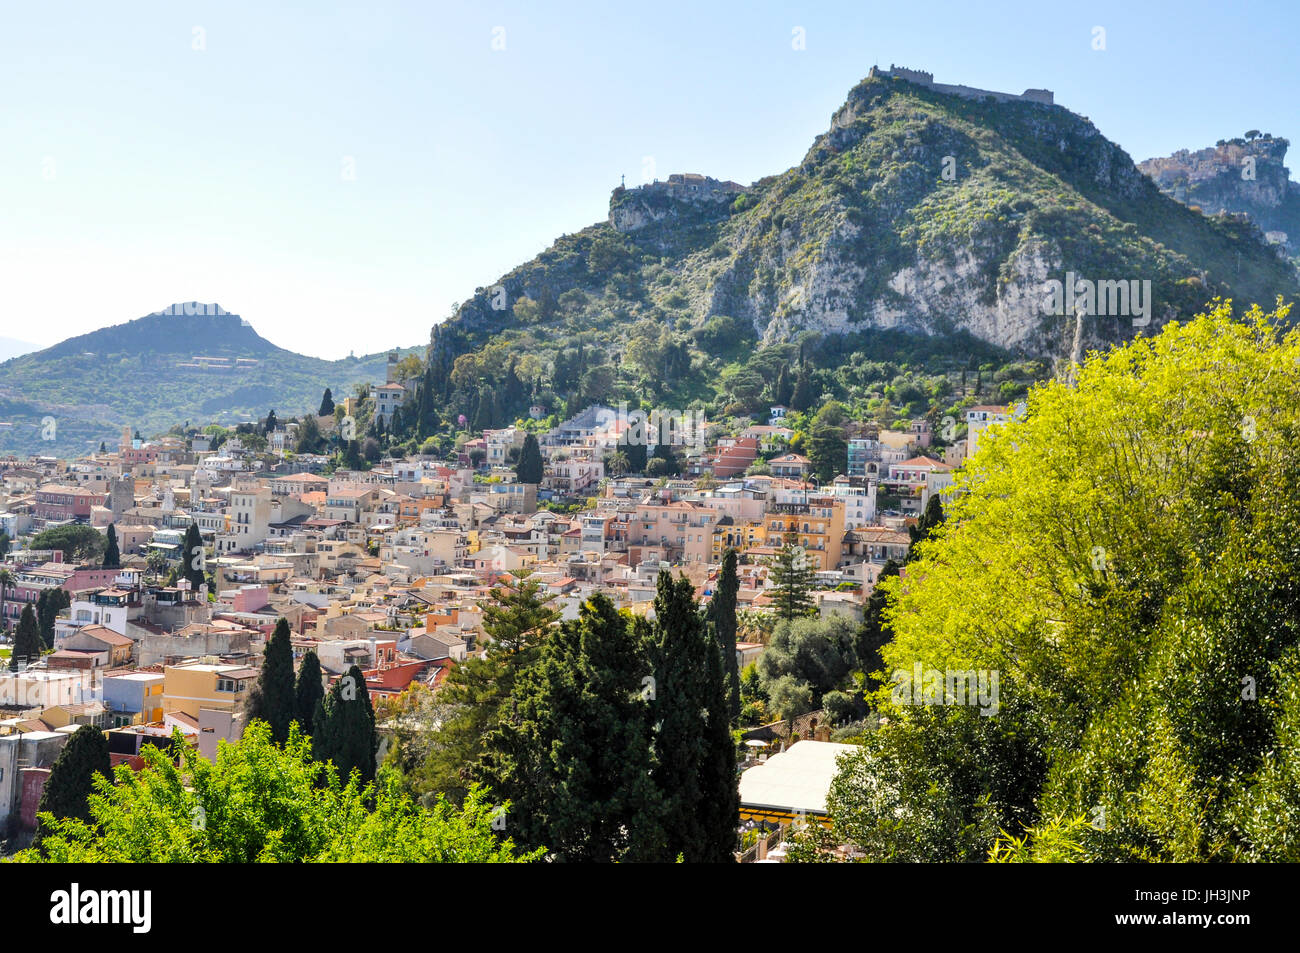 Picturesque town of Taormina in Sicily, Italy. Stock Photo